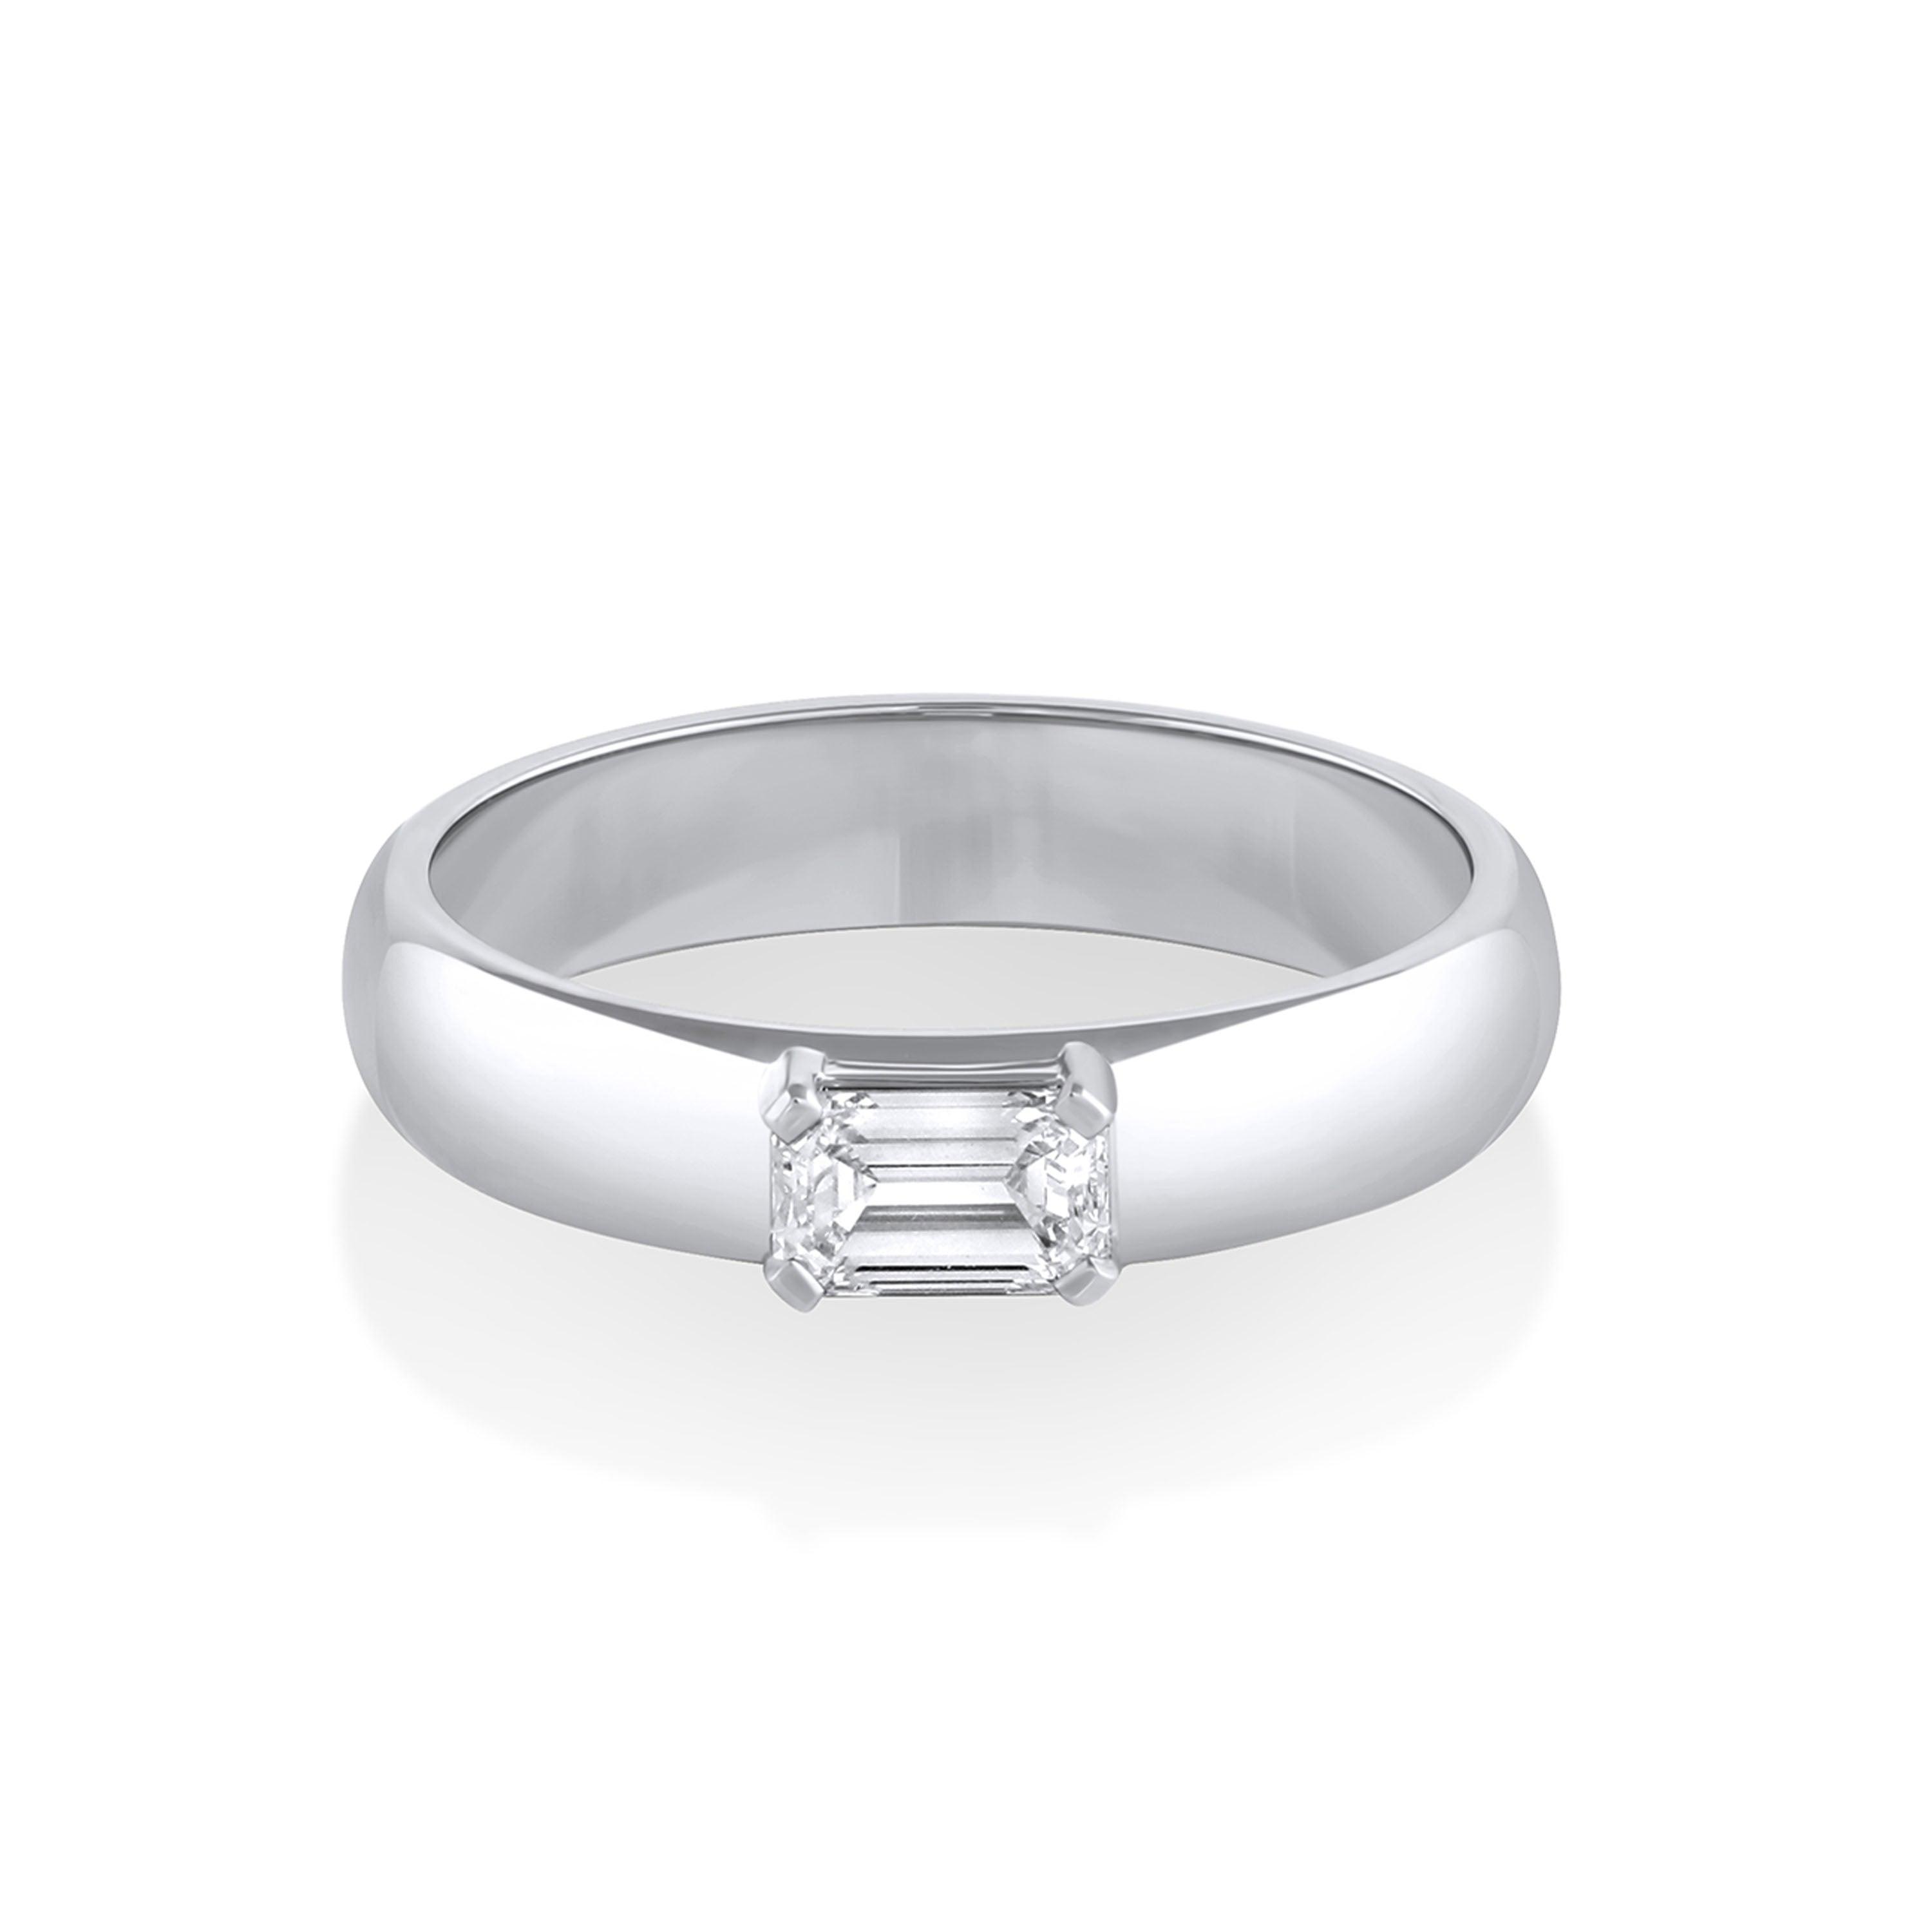 Marrow Fine Jewelry Minuette Collection Elodie Emerald Cut White Diamond Engagement Ring